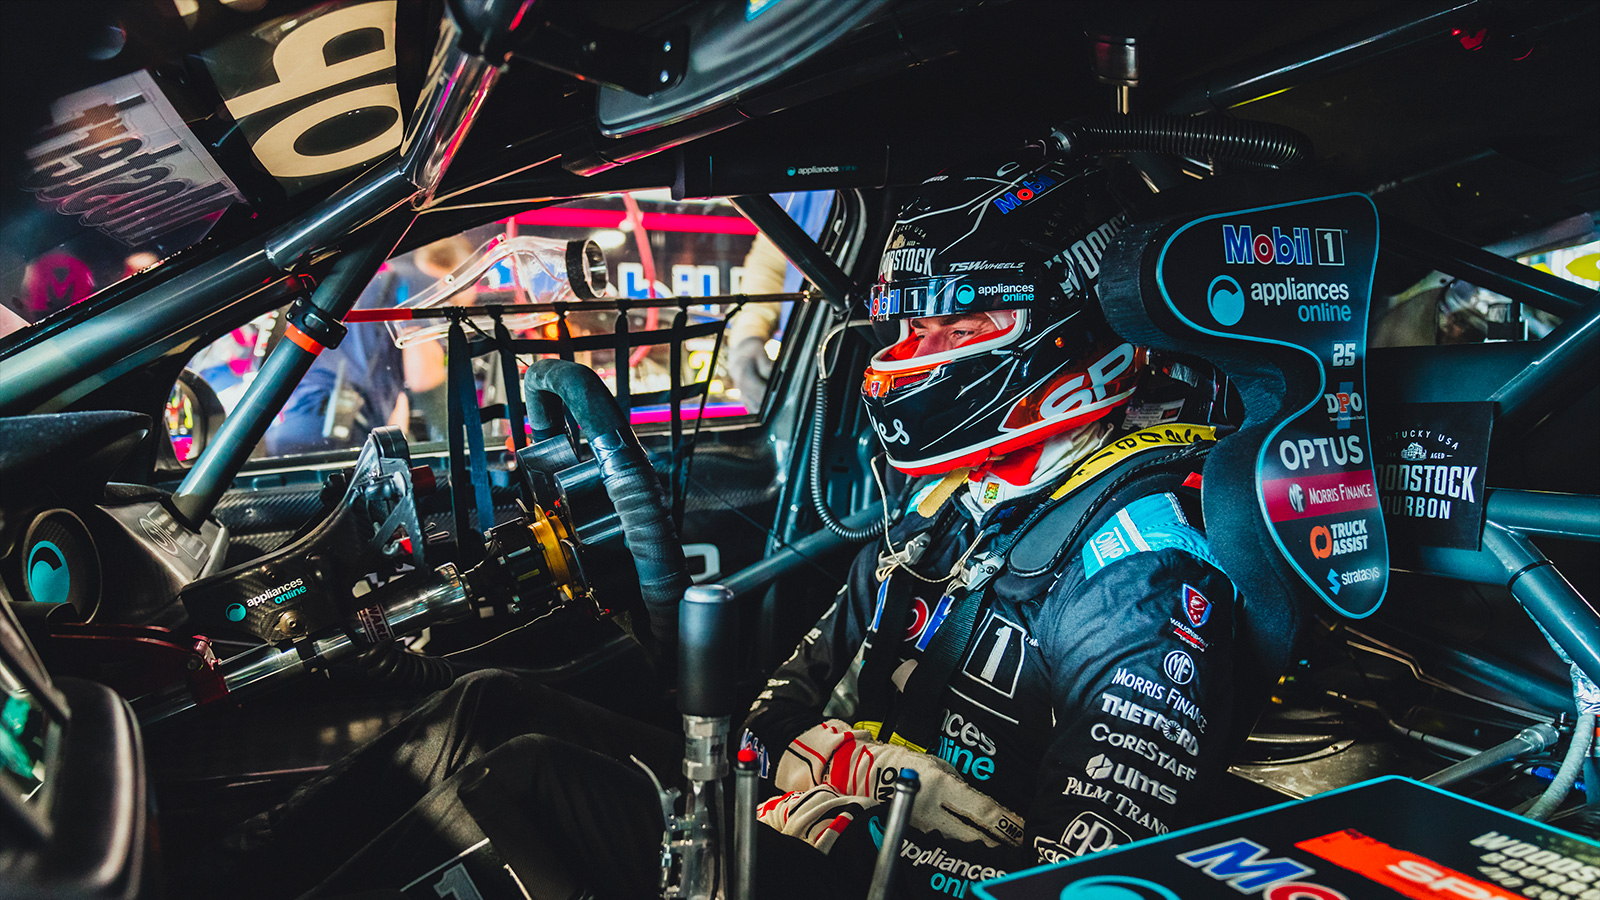 Chaz Mostert inside the Mobil 1 Appliances Online Racing No. 25.